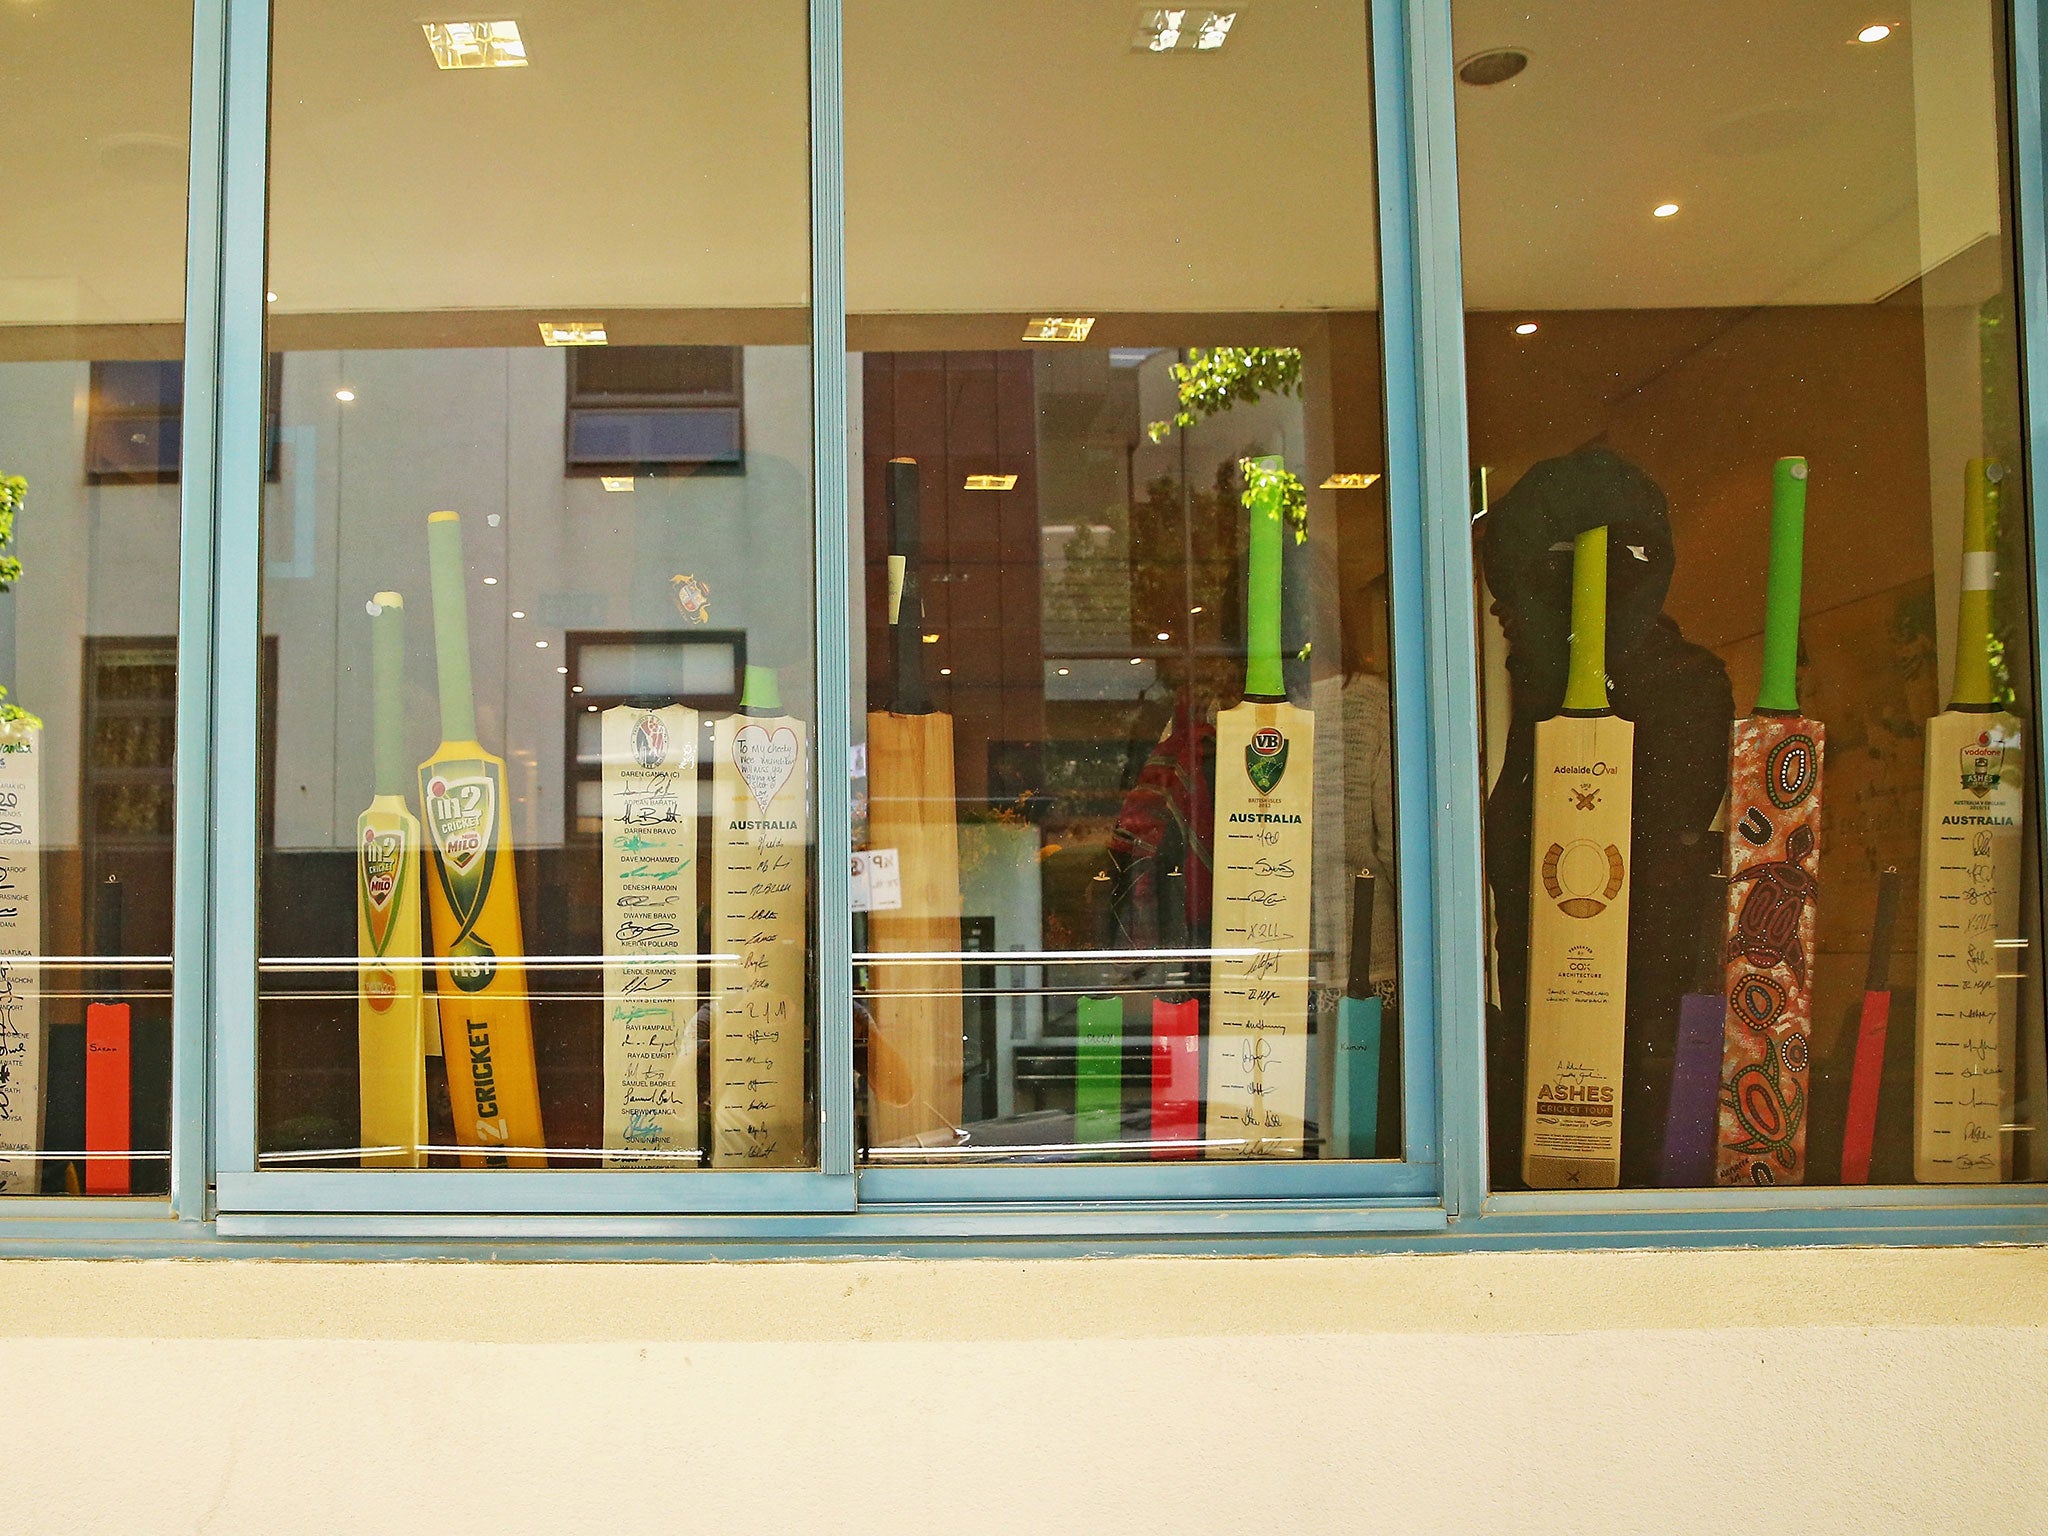 Cricket Australia placed 63 bats in the windows of their Melbourne office to remember the 63 not-out scored by Hughes